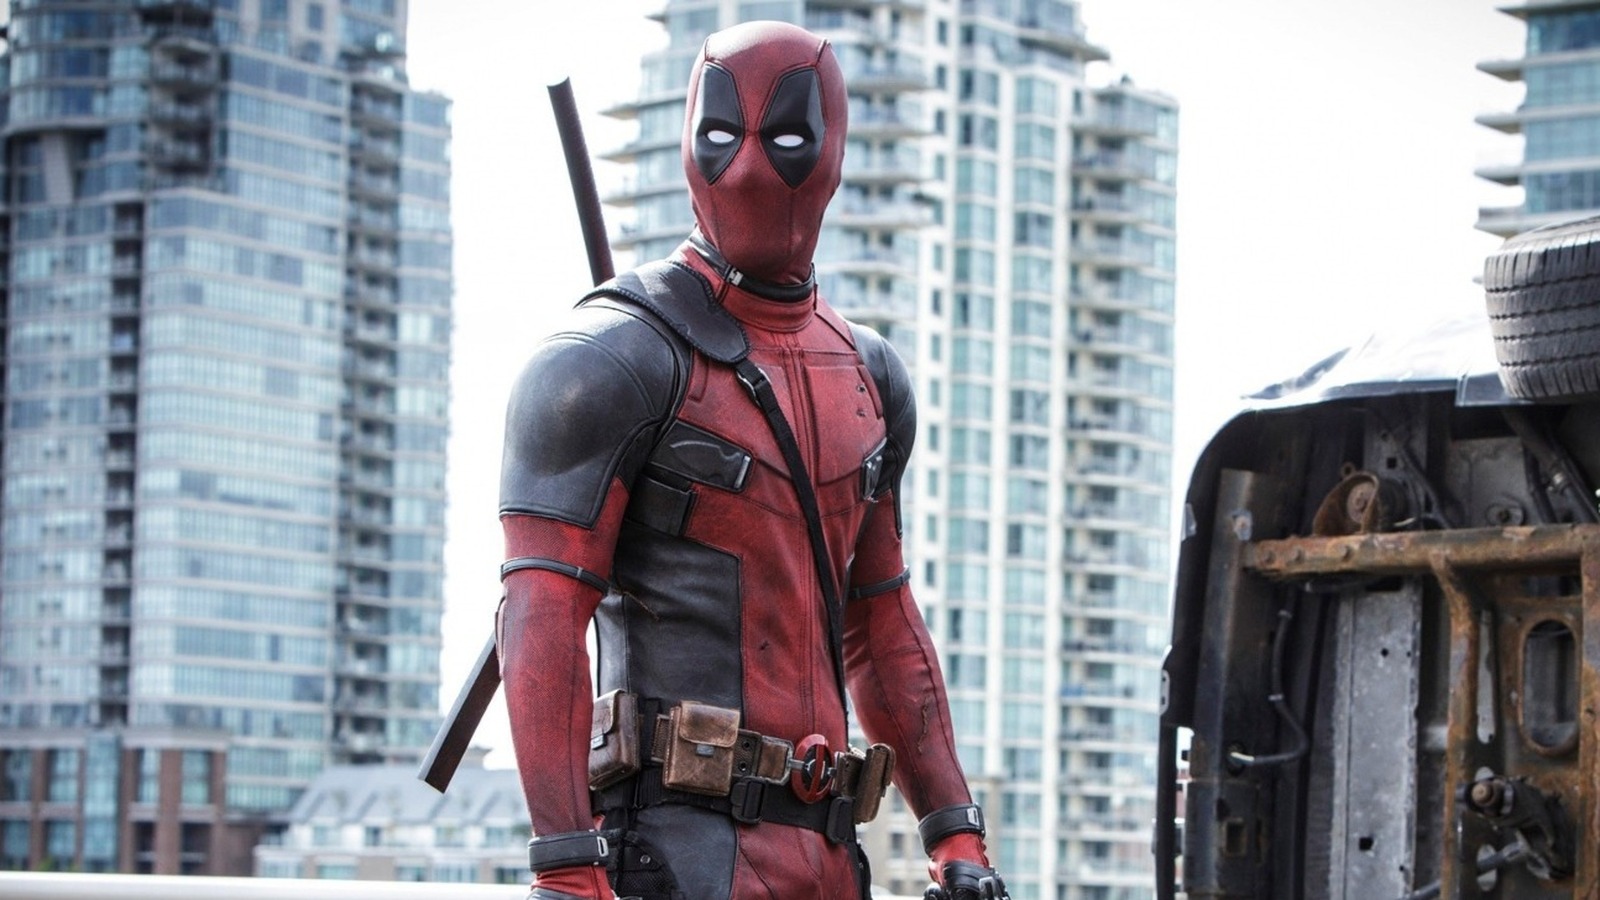 Somehow These Deadpool Deleted Scenes Were Too Gnarly For The Movies